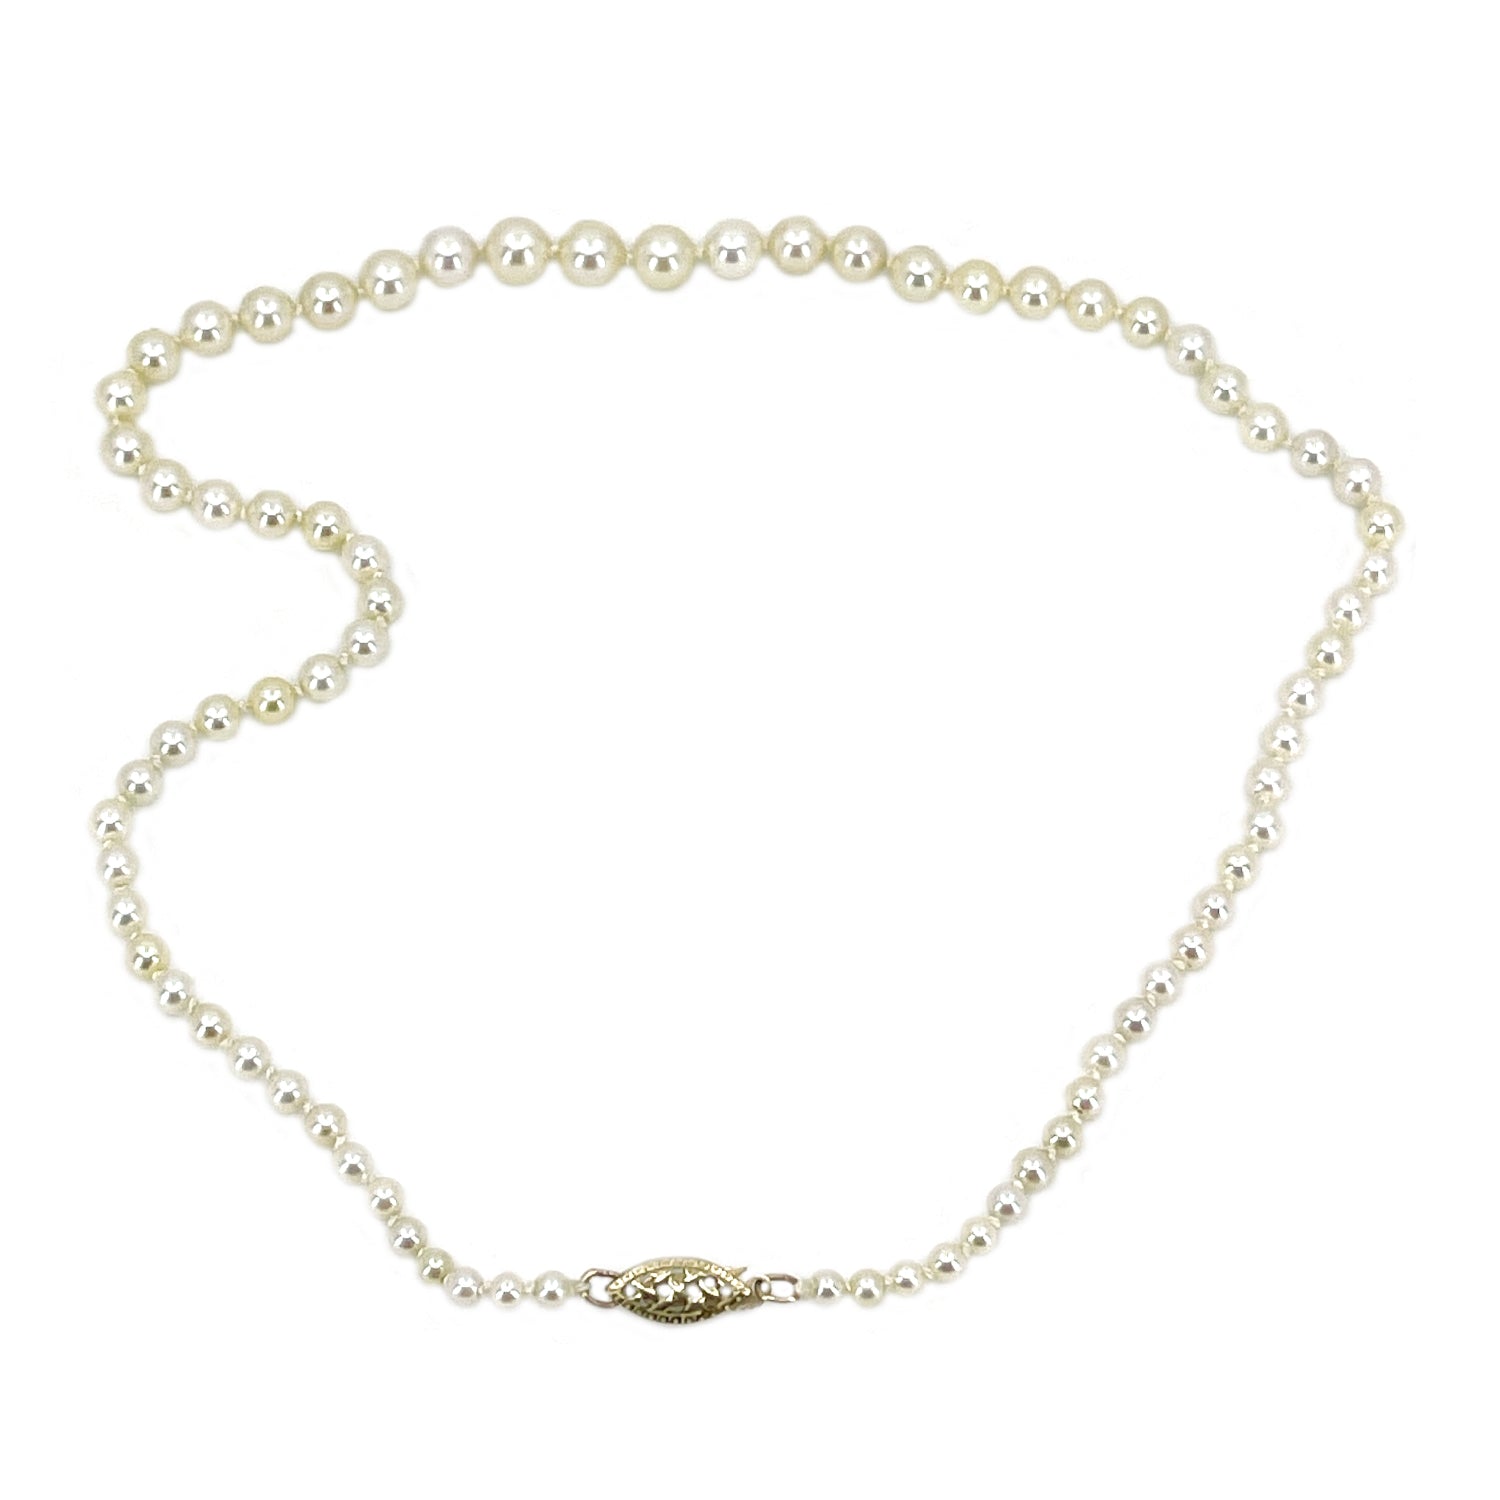 Choker Petite Graduated Japanese Cultured Saltwater Akoya Pearl Necklace - 14K Yellow Gold 14.50 Inch